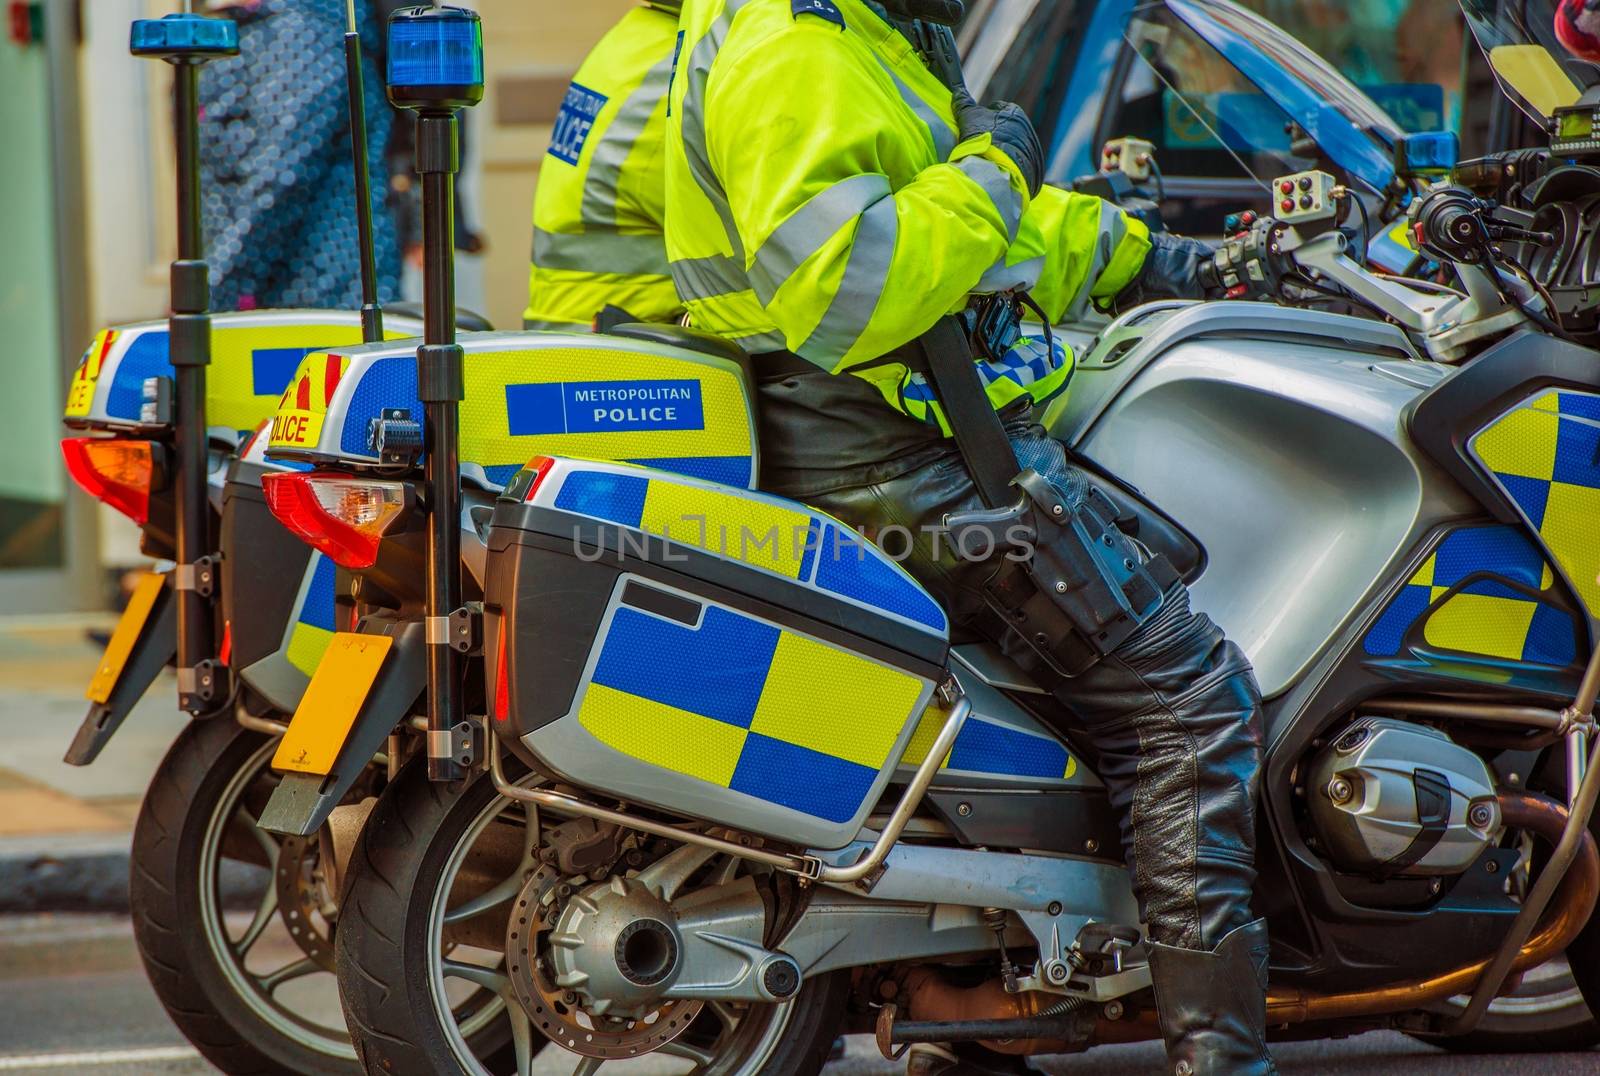 London Motorcycle Police by welcomia